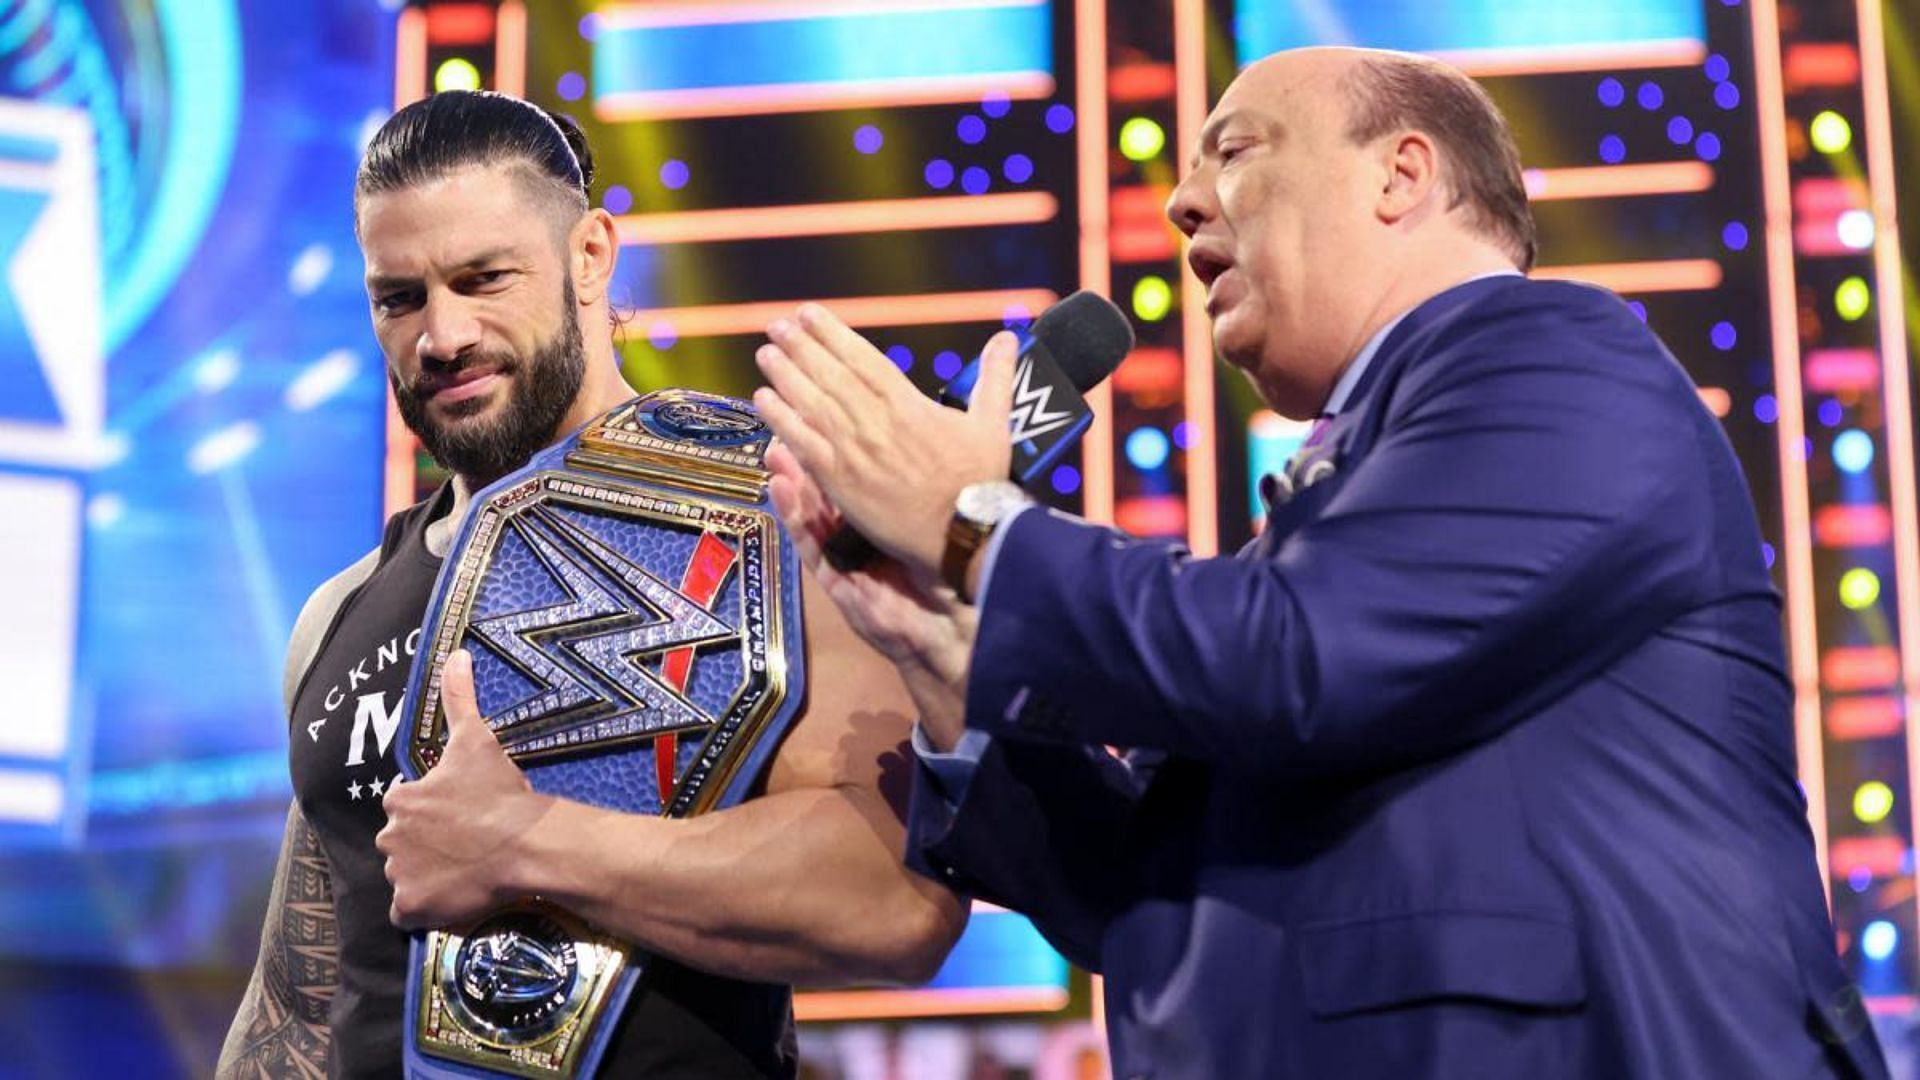 Paul Heyman has proven valuable to Roman Reigns.